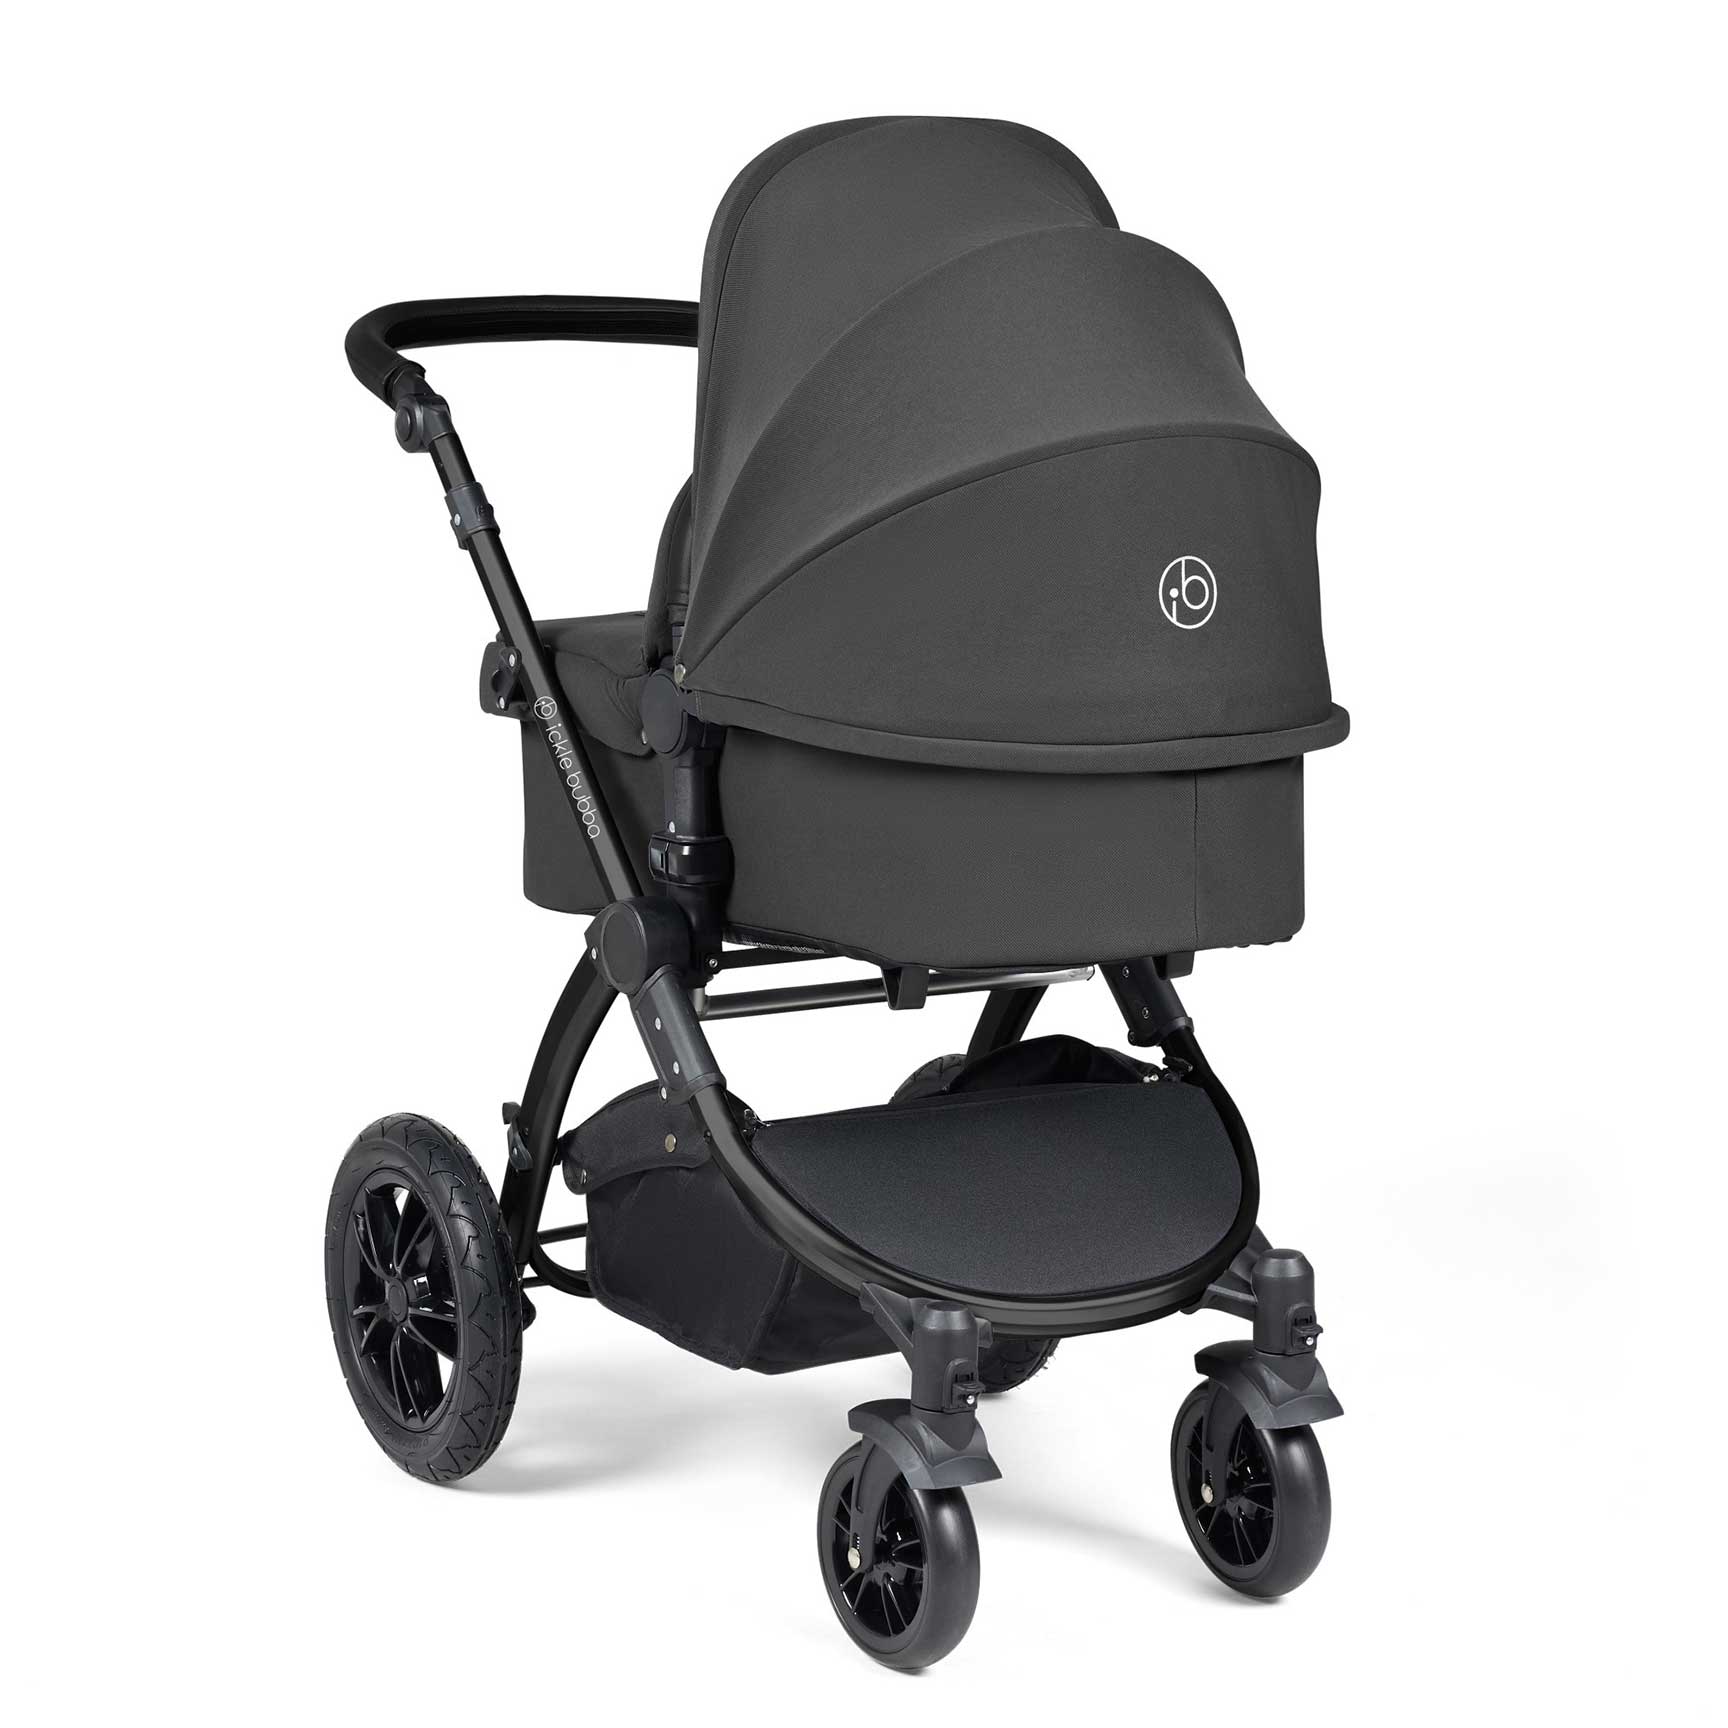 Ickle Bubba Stomp Luxe All-in-One Travel System with Isofix Base in Black/Charcoal Grey/Black Travel Systems 10-011-300-206 5056515026450